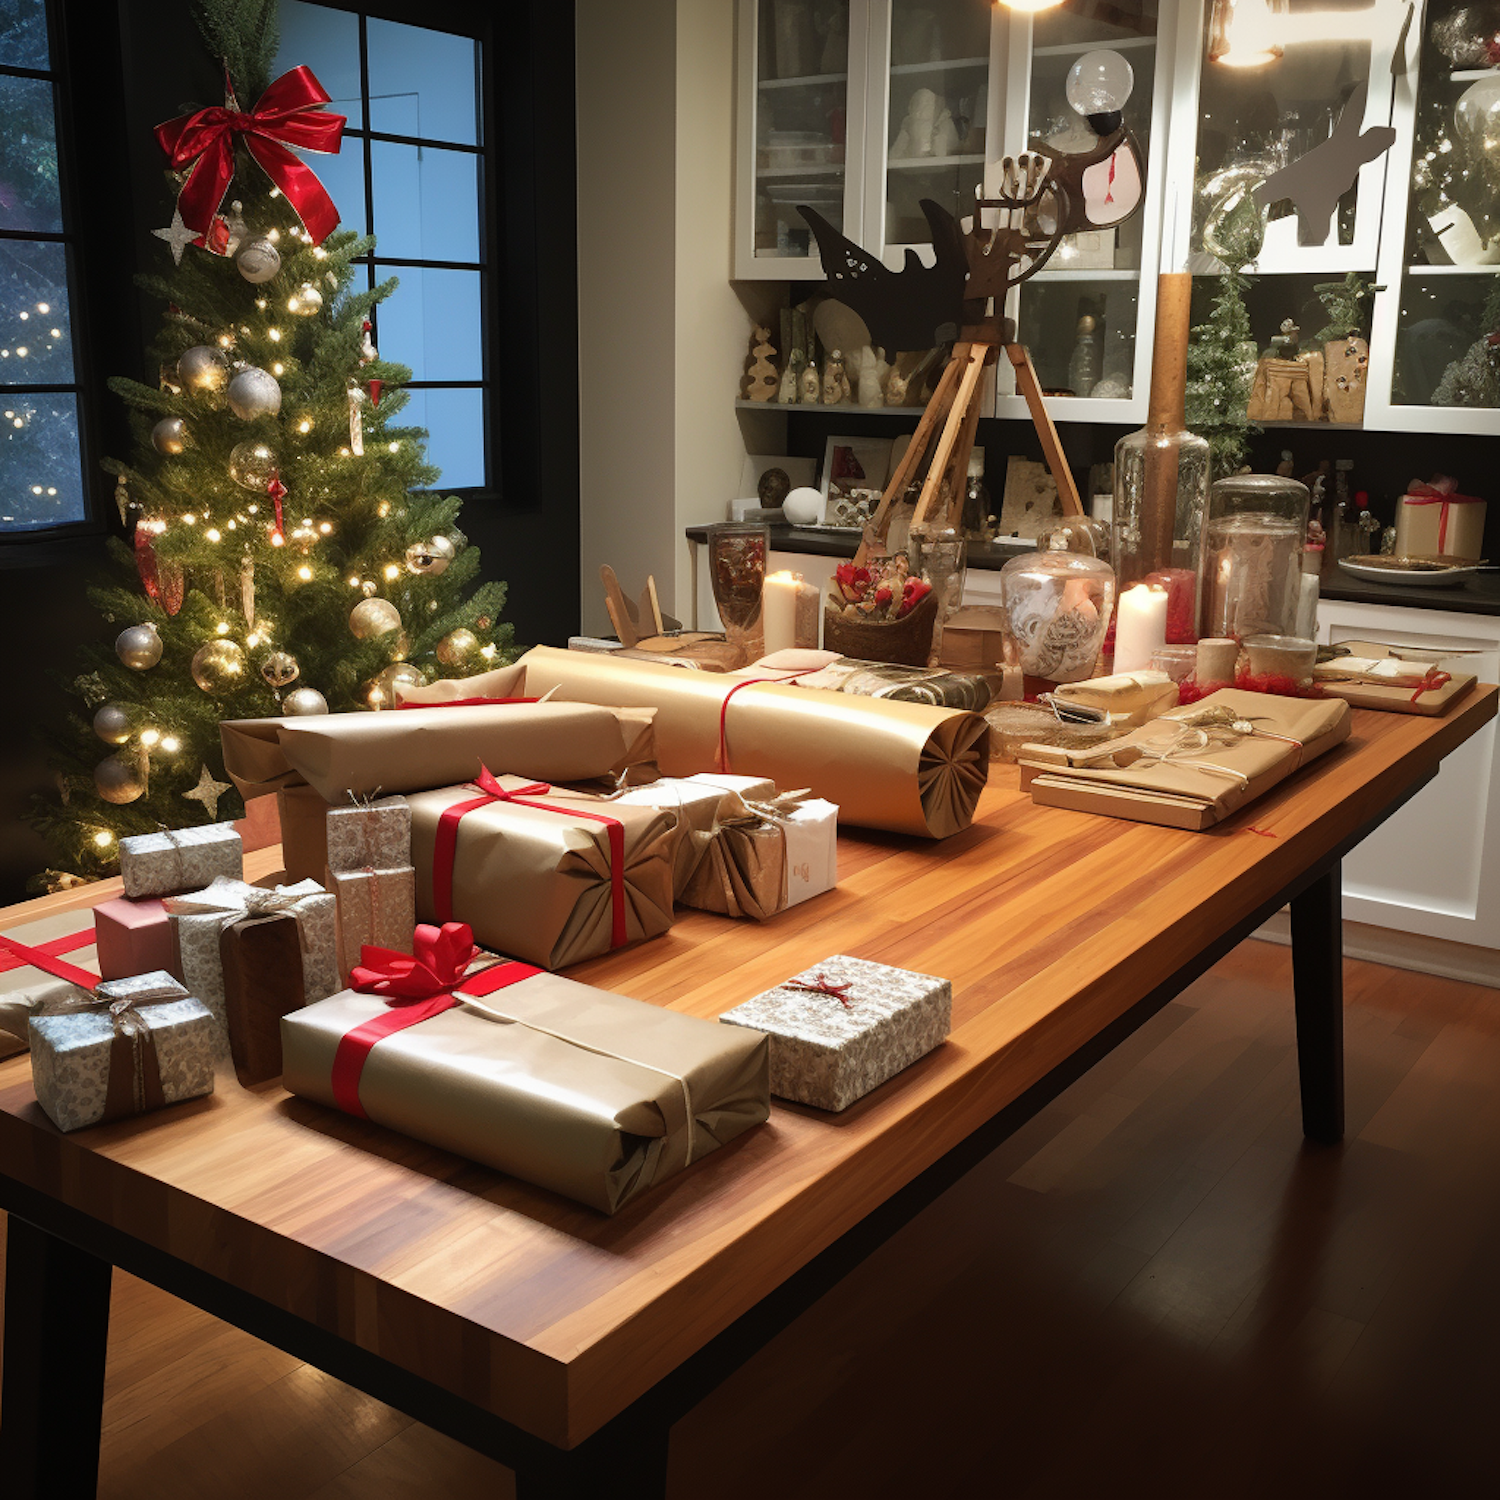 Festive Christmas Elegance with Gifts and Candles